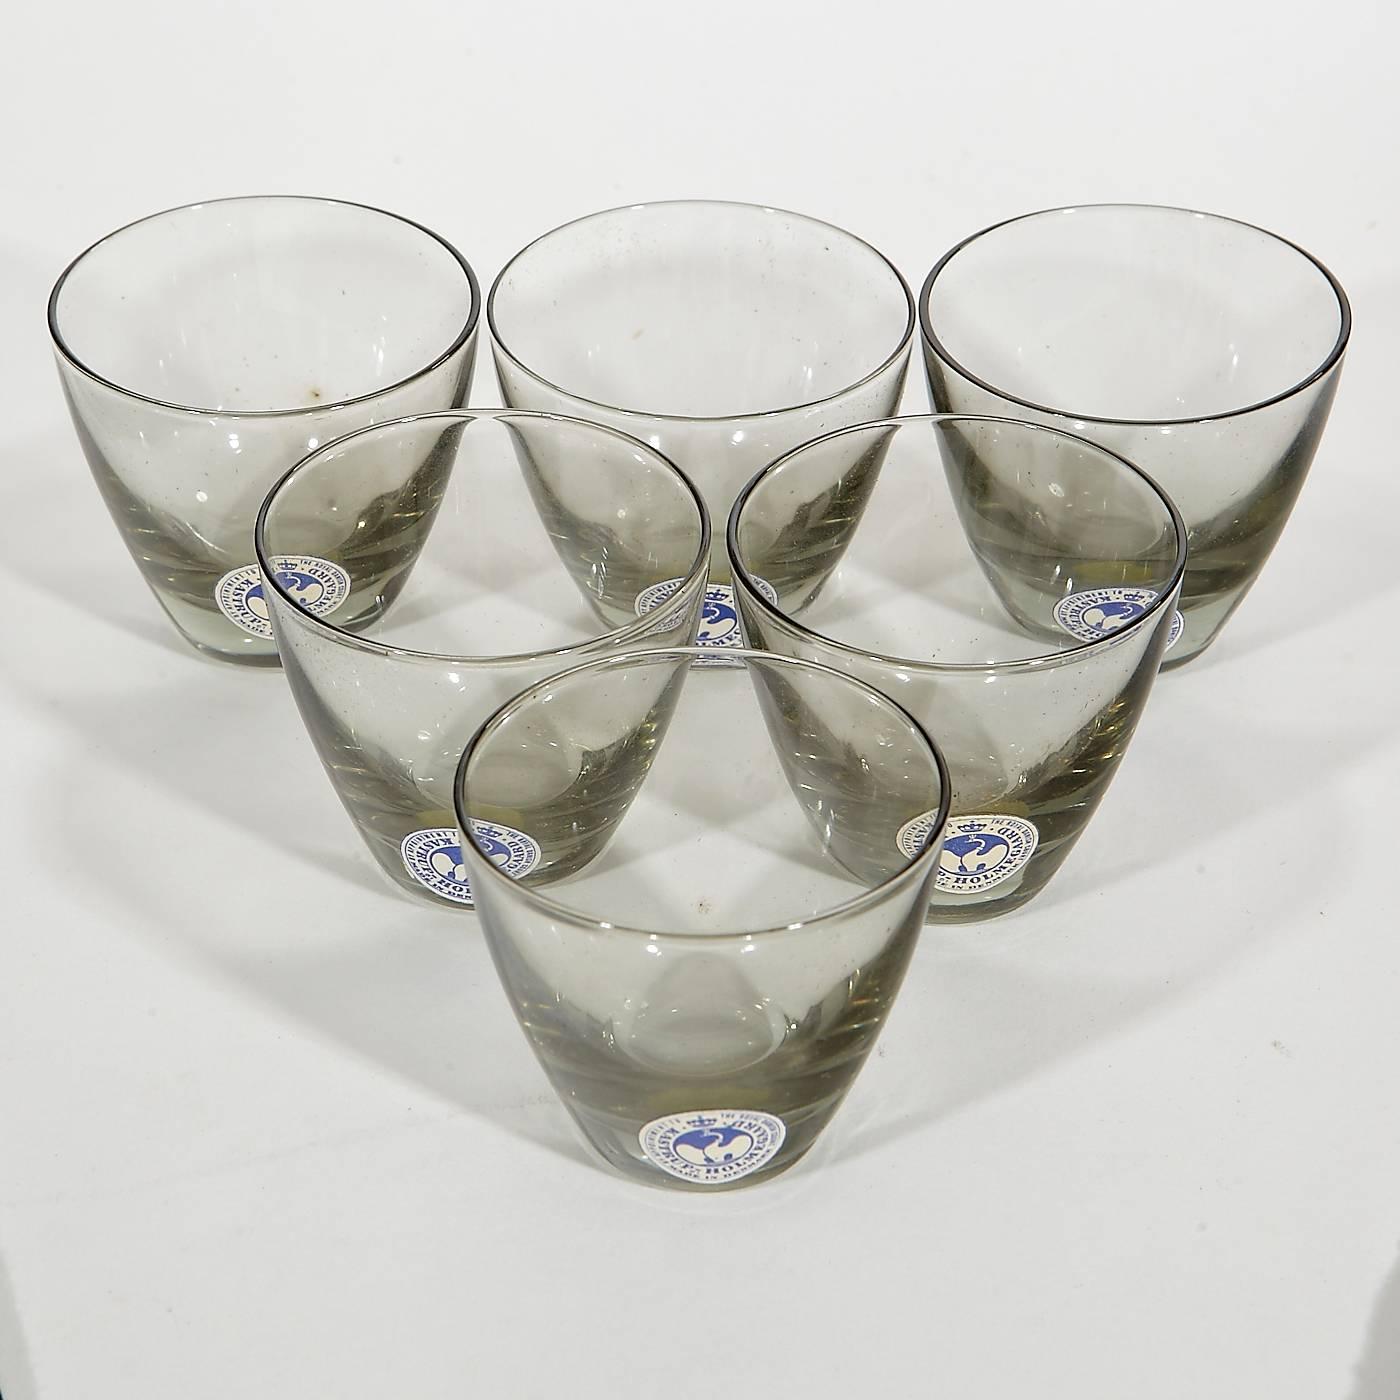 Vintage Holmegaard of Denmark, 1960s set of six glass smoked 1 1/2 oz whiskey tumblers in the original box and in unused condition. The set includes the box.